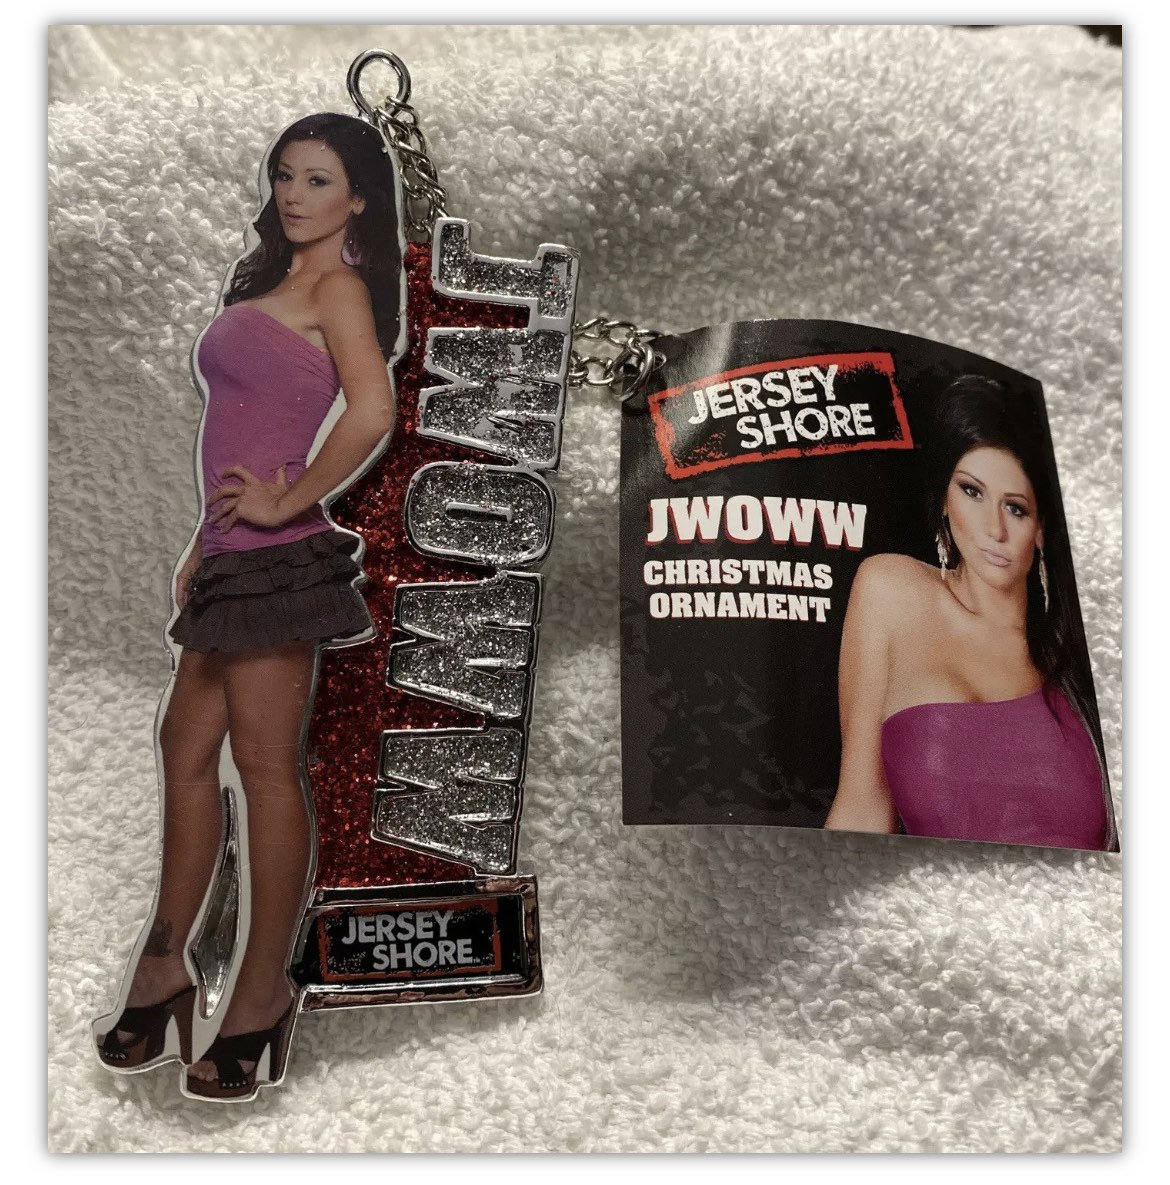 Pin by sarah on jersey shore  Shore outfits, Jwoww jersey shore, Clubbing  outfits